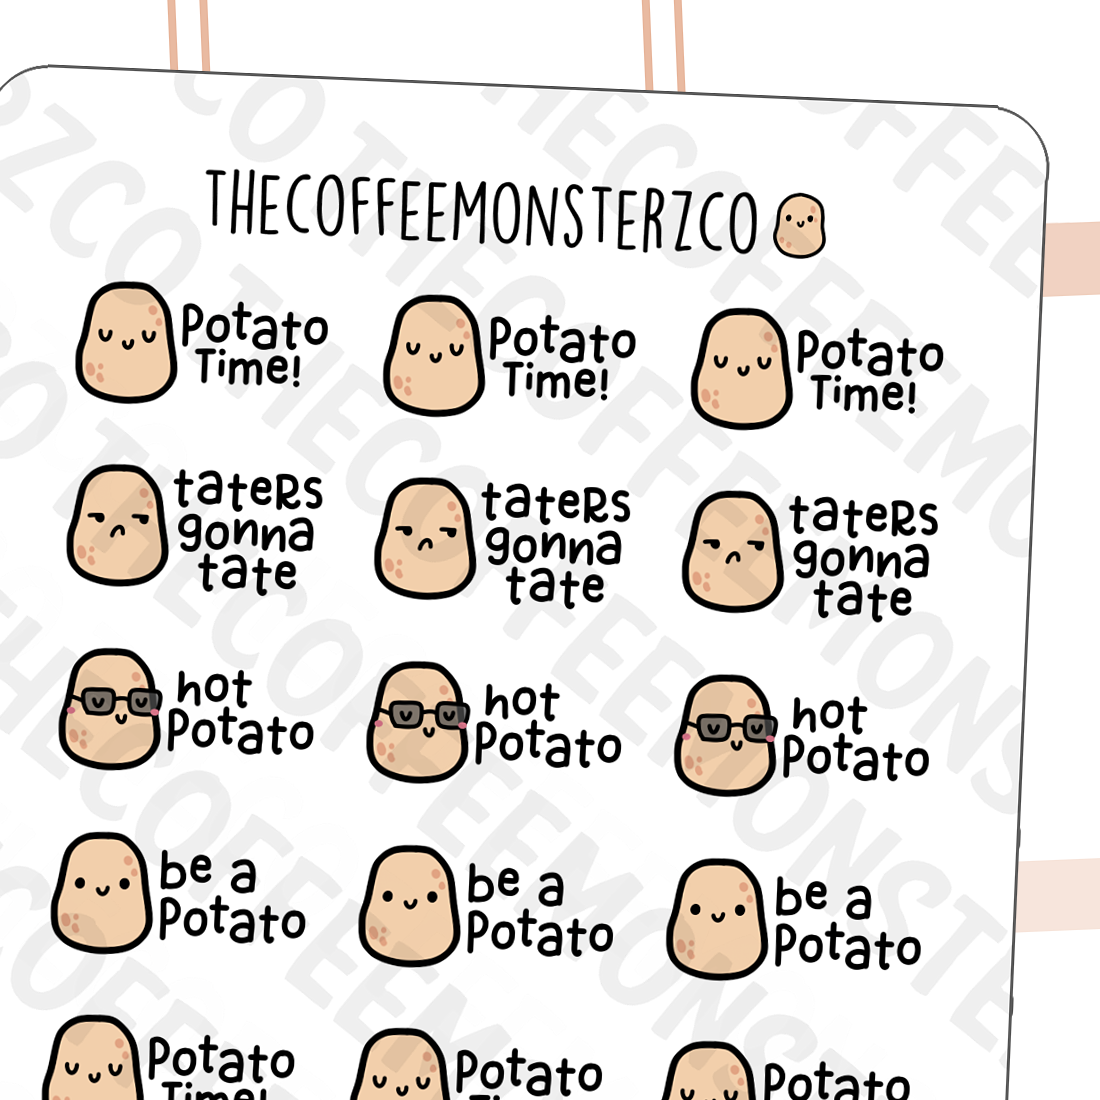 Just Be a Potato - TheCoffeeMonsterzCo